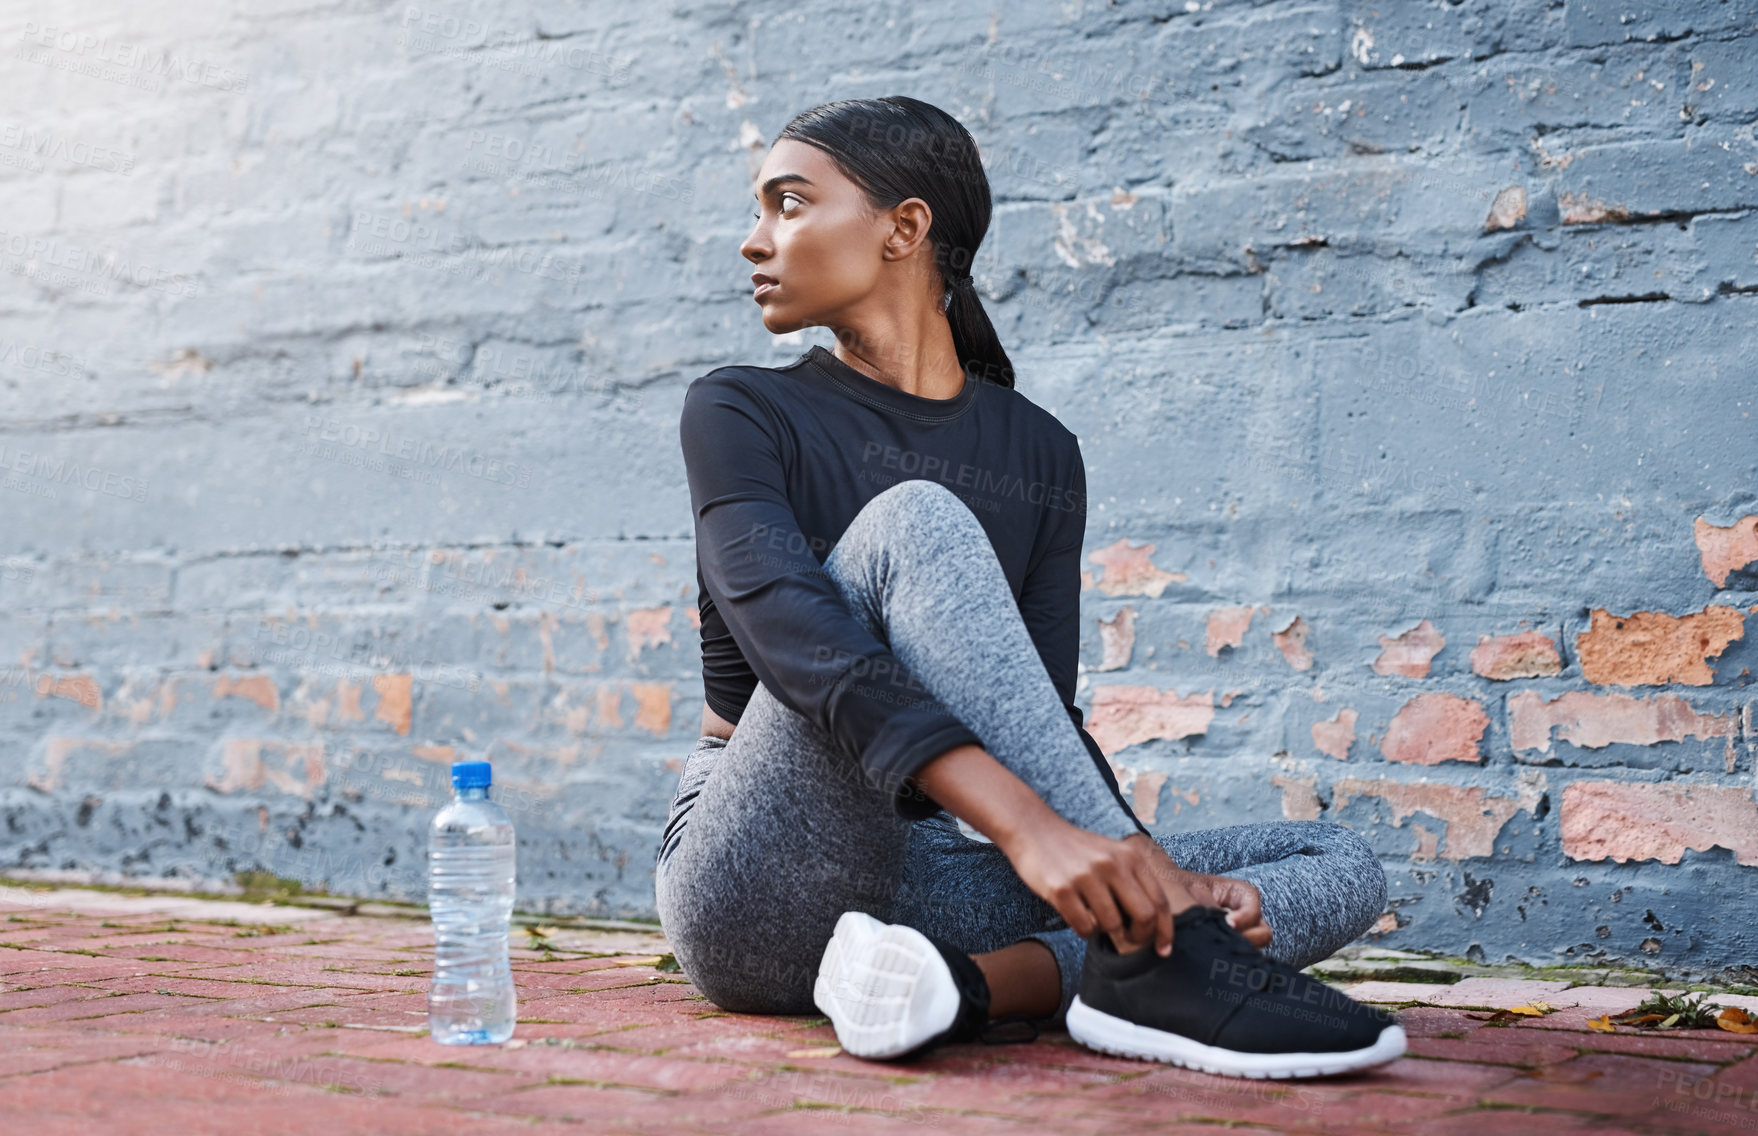 Buy stock photo Shot of a young woman tying her shoelaces before a workout session